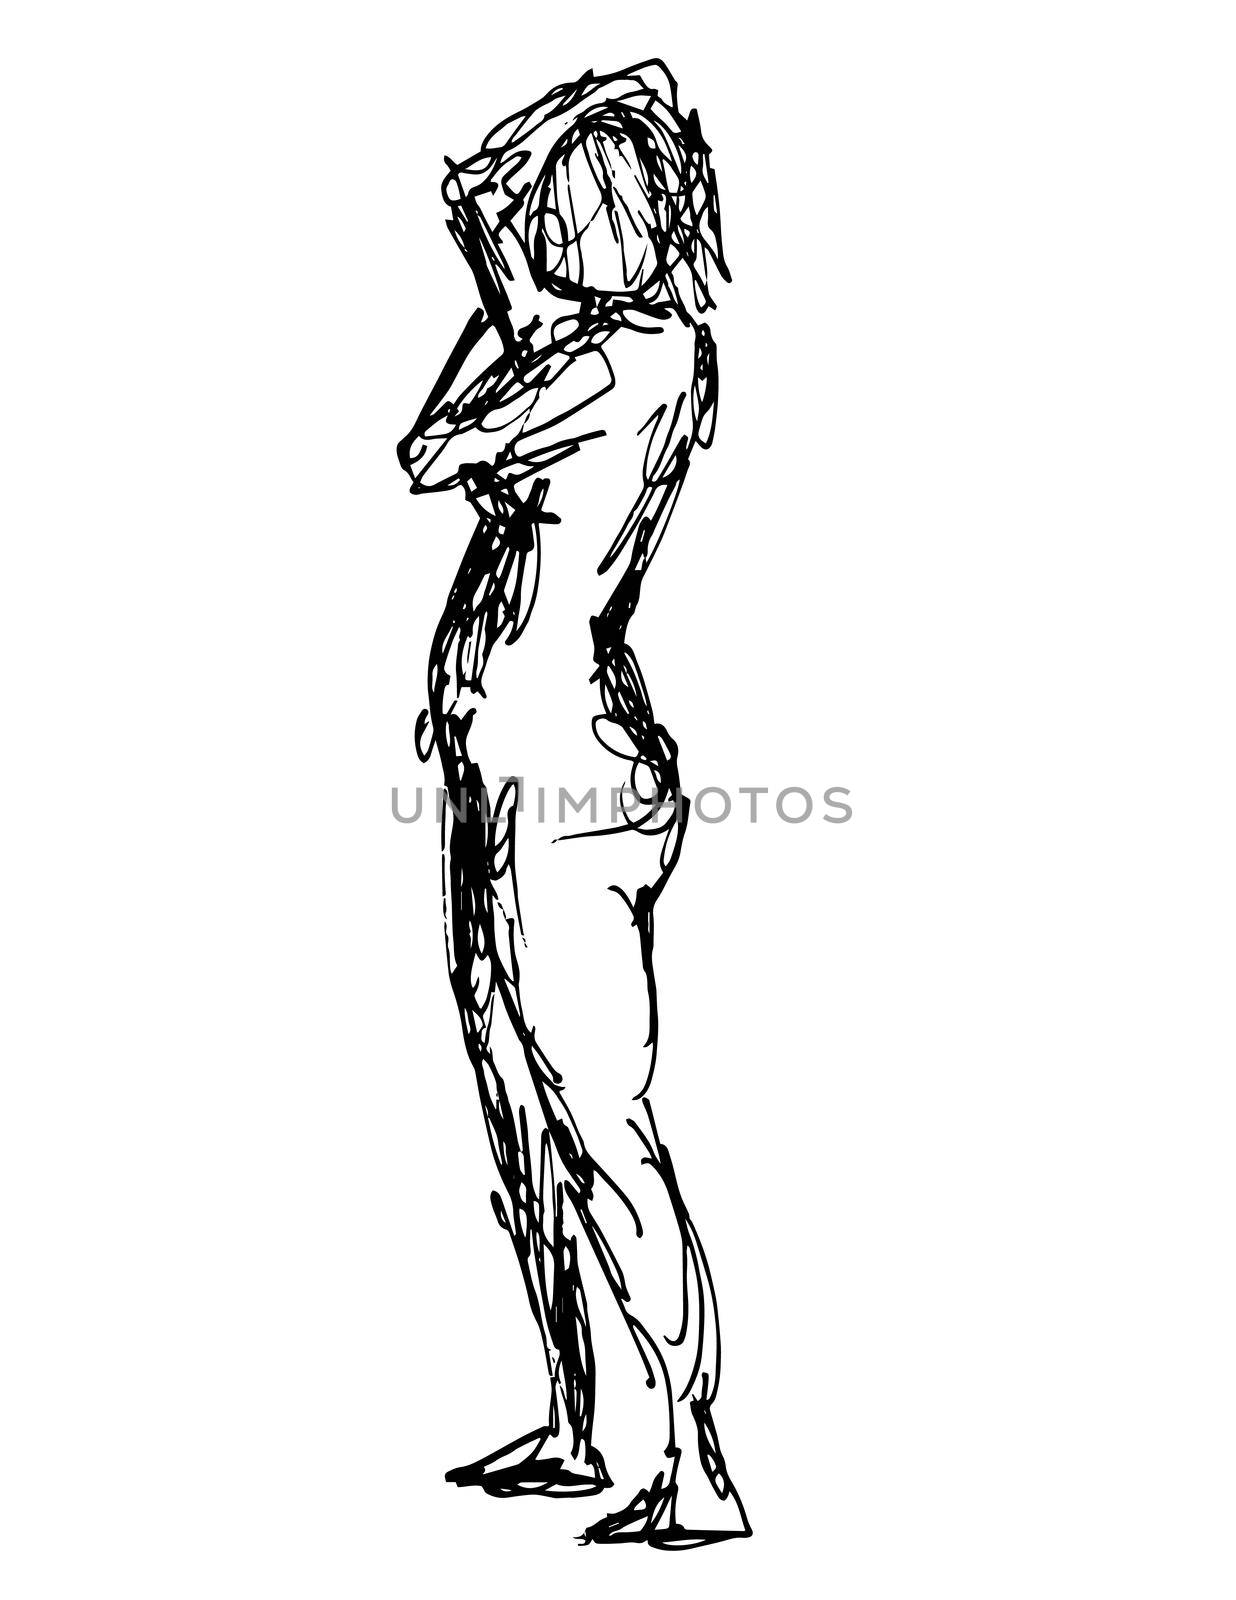 Doodle art illustration of a nude female human figure posing with hand behind head side view  in continuous line drawing style in black and white on isolated background.